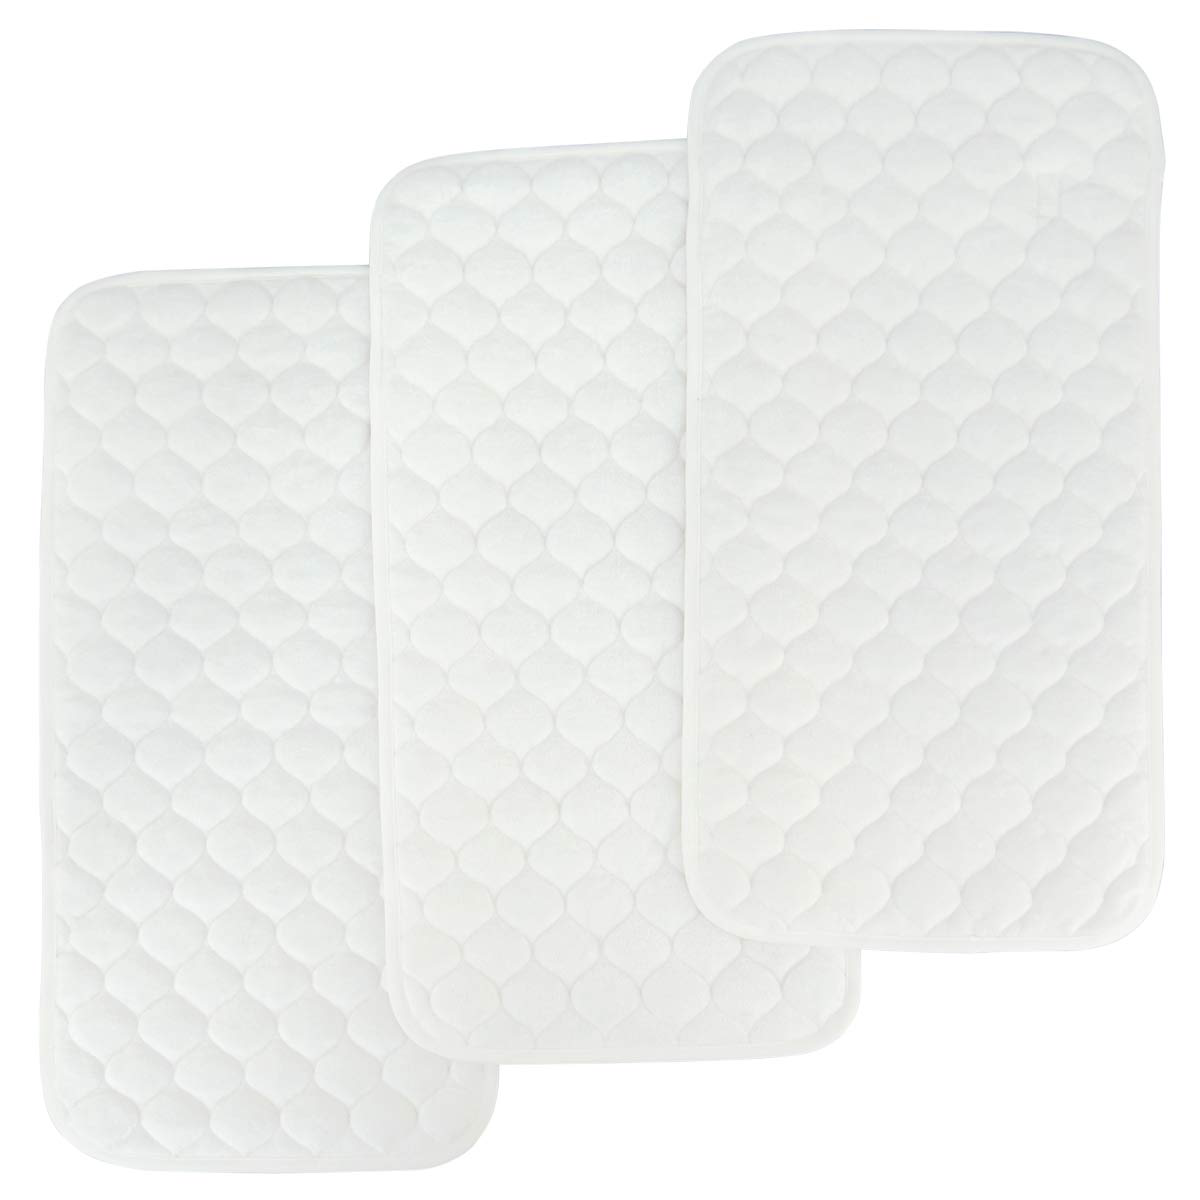 Bluesnail Bamboo Quilted Thicker Waterproof Changing Pad Liners, 3 Count (Snow White)